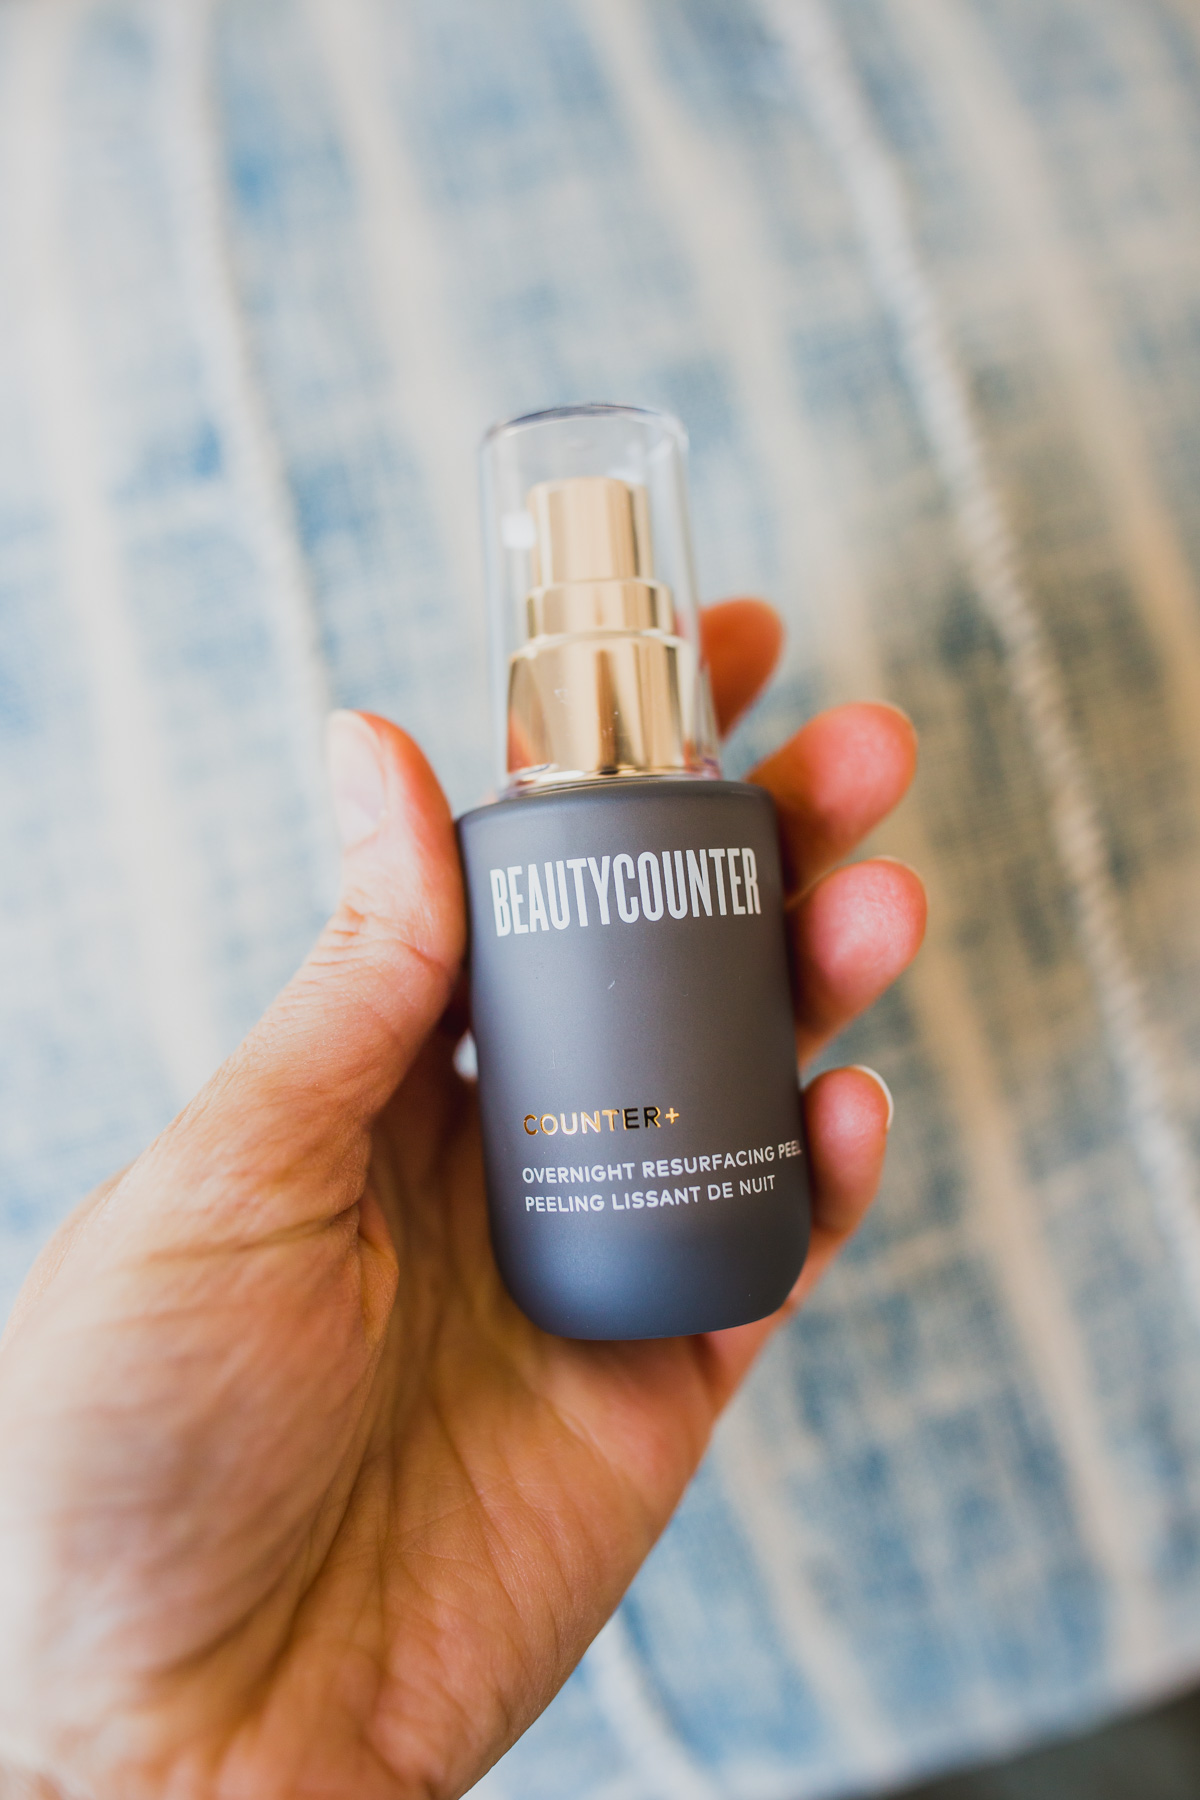 If you're wondering how to get rid of dark spots on face and how to get rid of hyperpigmentation, let me introduce you to one of my favorite safe skincare products—the Beautycounter Overnight Peel. This gentle peel can help to even skin tone, remove dark spots on face, and give you clear glowing skin. It's part of my natural skin care routine and makes a huge difference in skin's clarity and radiance, click through to see exactly how to use it. #safeskincare #beautycounter